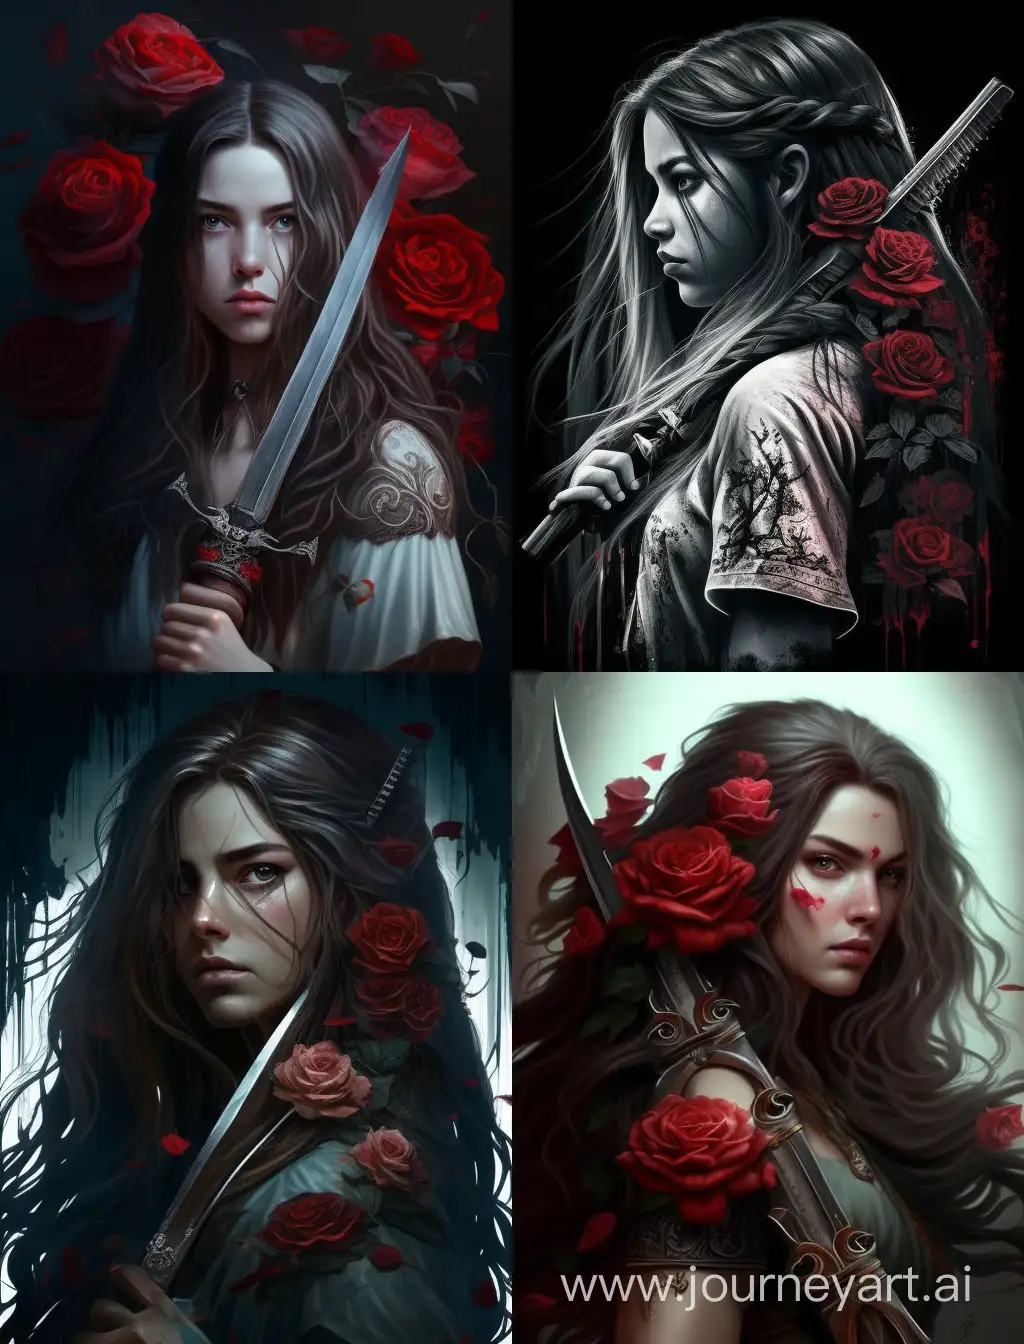 LongHaired-Girl-Expertly-Cuts-Roses-with-Katana-Sword